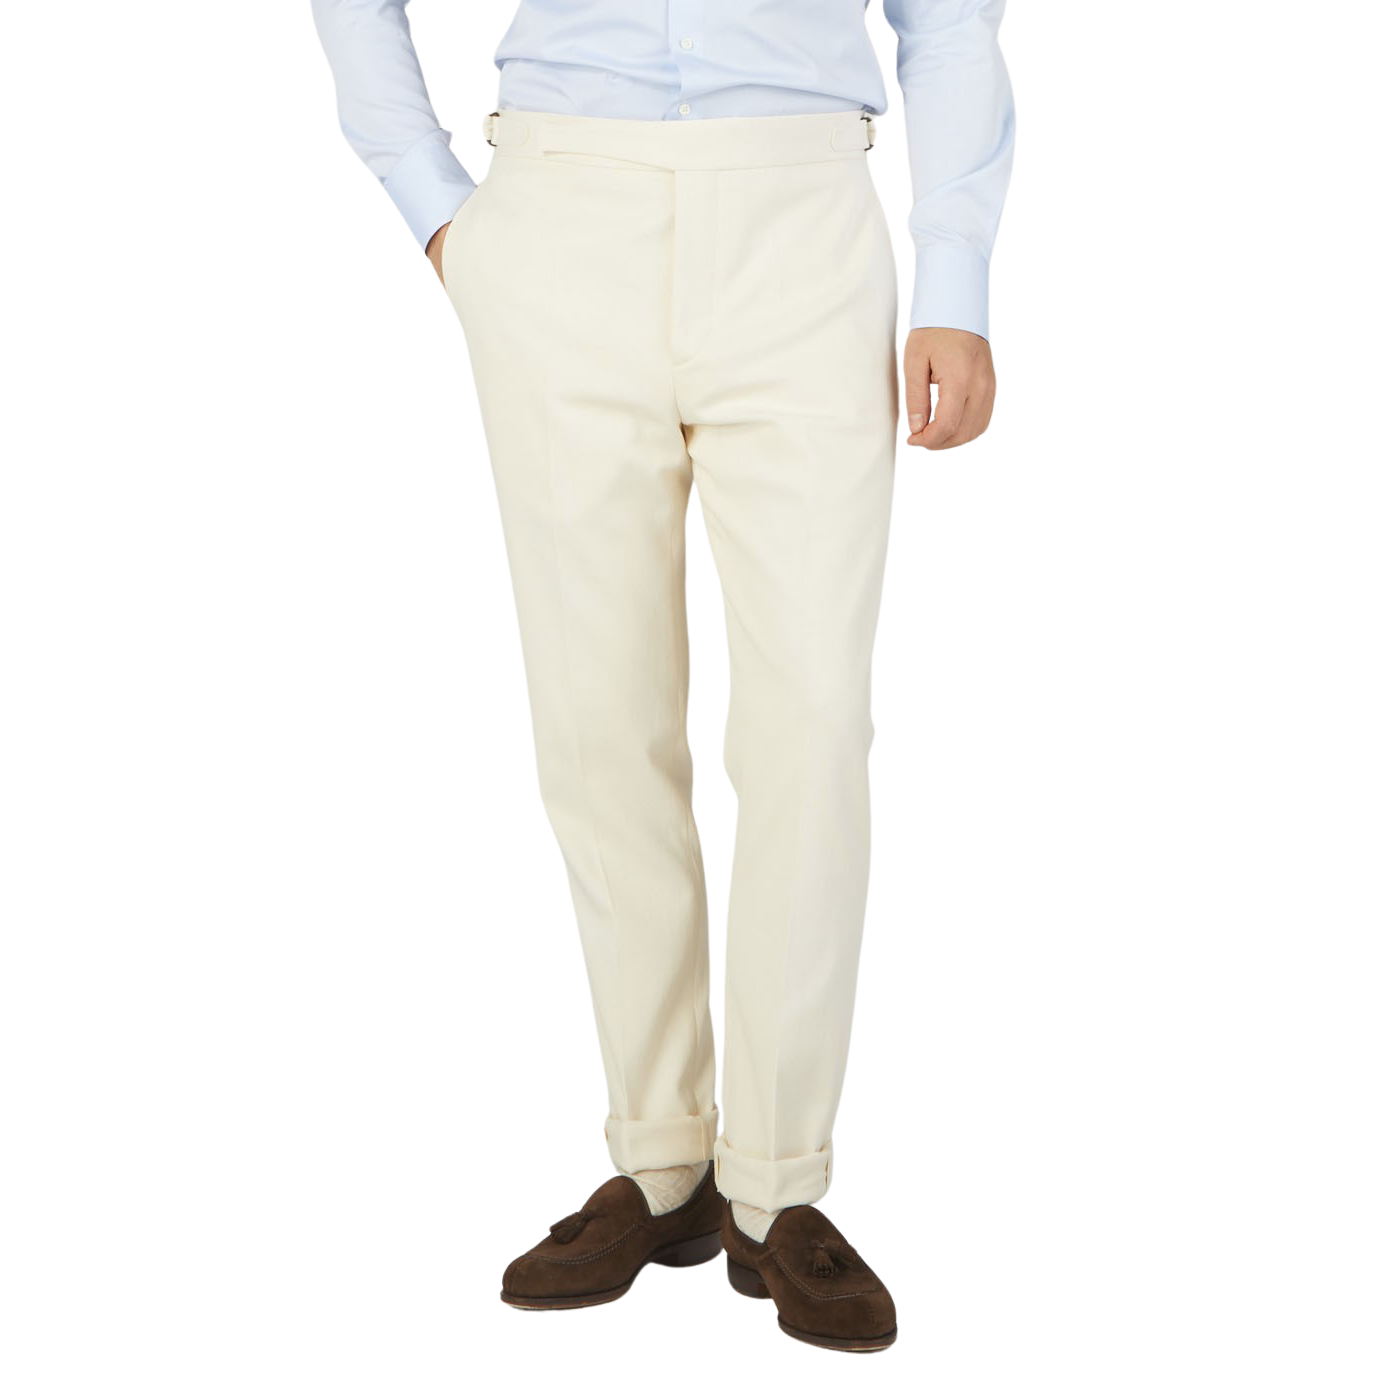 Buy Mens Casual Chinos Trousers Cream Navy Blue and Blue Combo of 3 PV  Cotton for Best Price, Reviews, Free Shipping